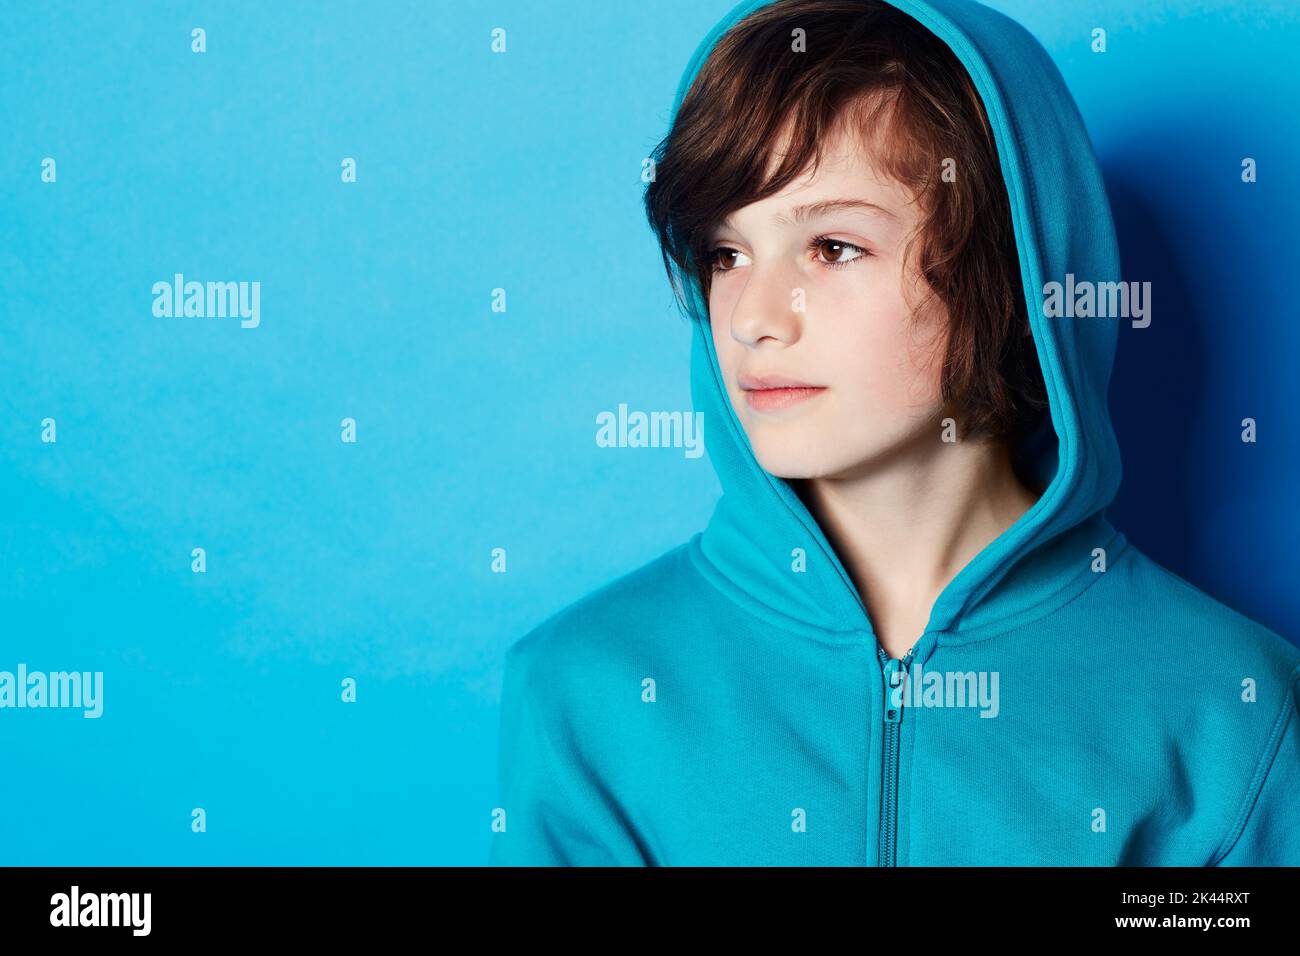 Casual contemplation. A young boy wearing a blue hoodie in the studio. Stock Photo